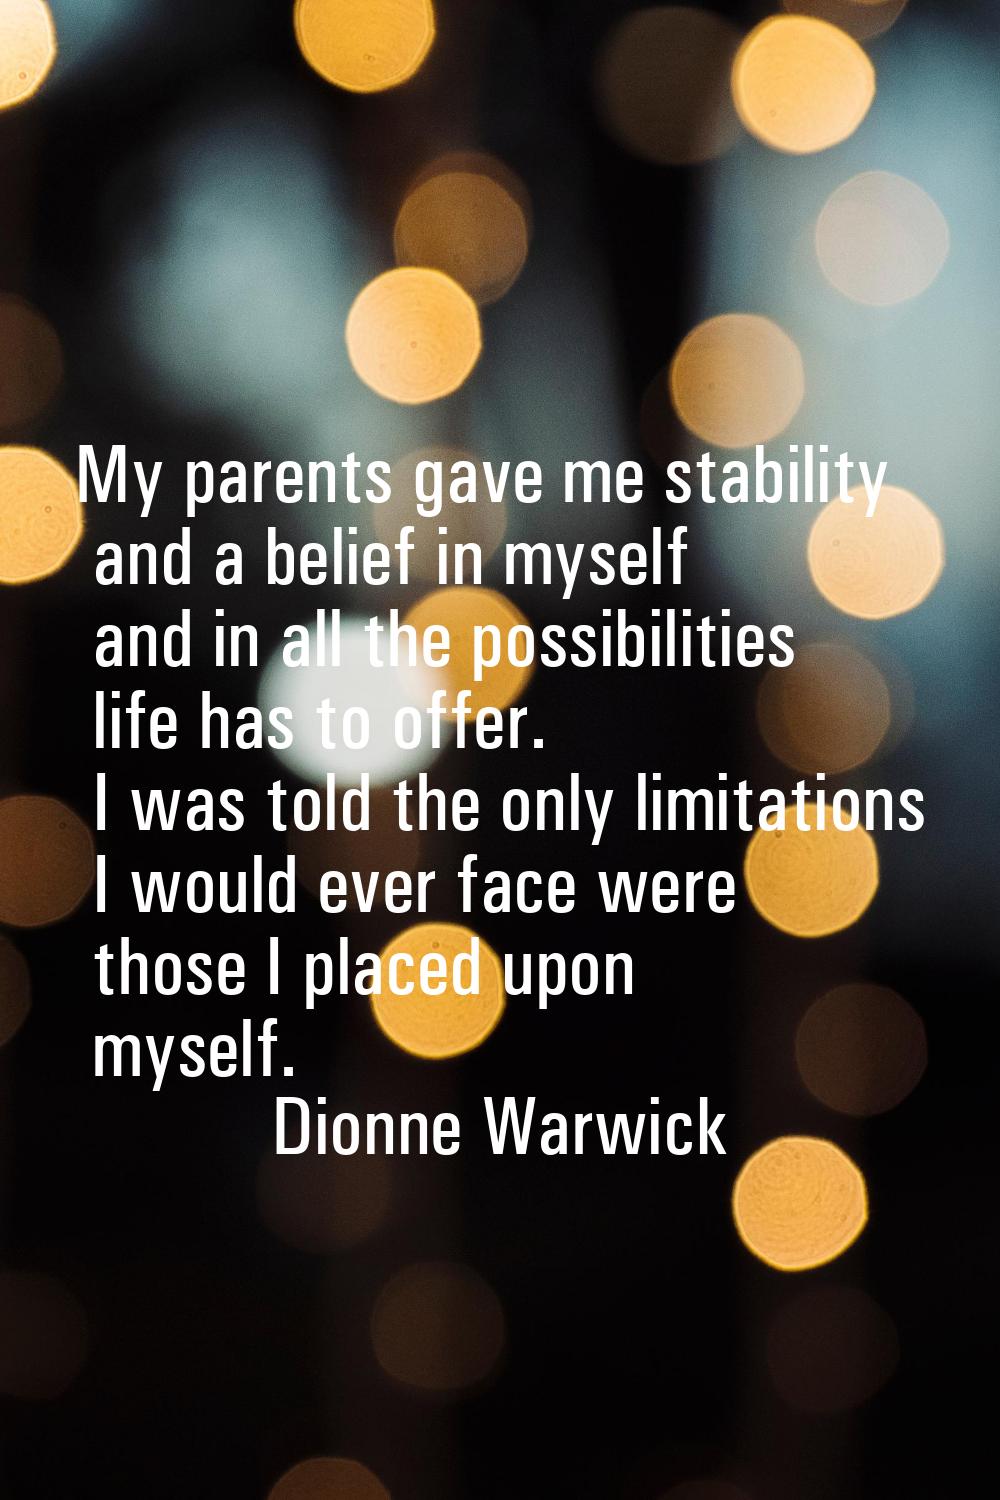 My parents gave me stability and a belief in myself and in all the possibilities life has to offer.